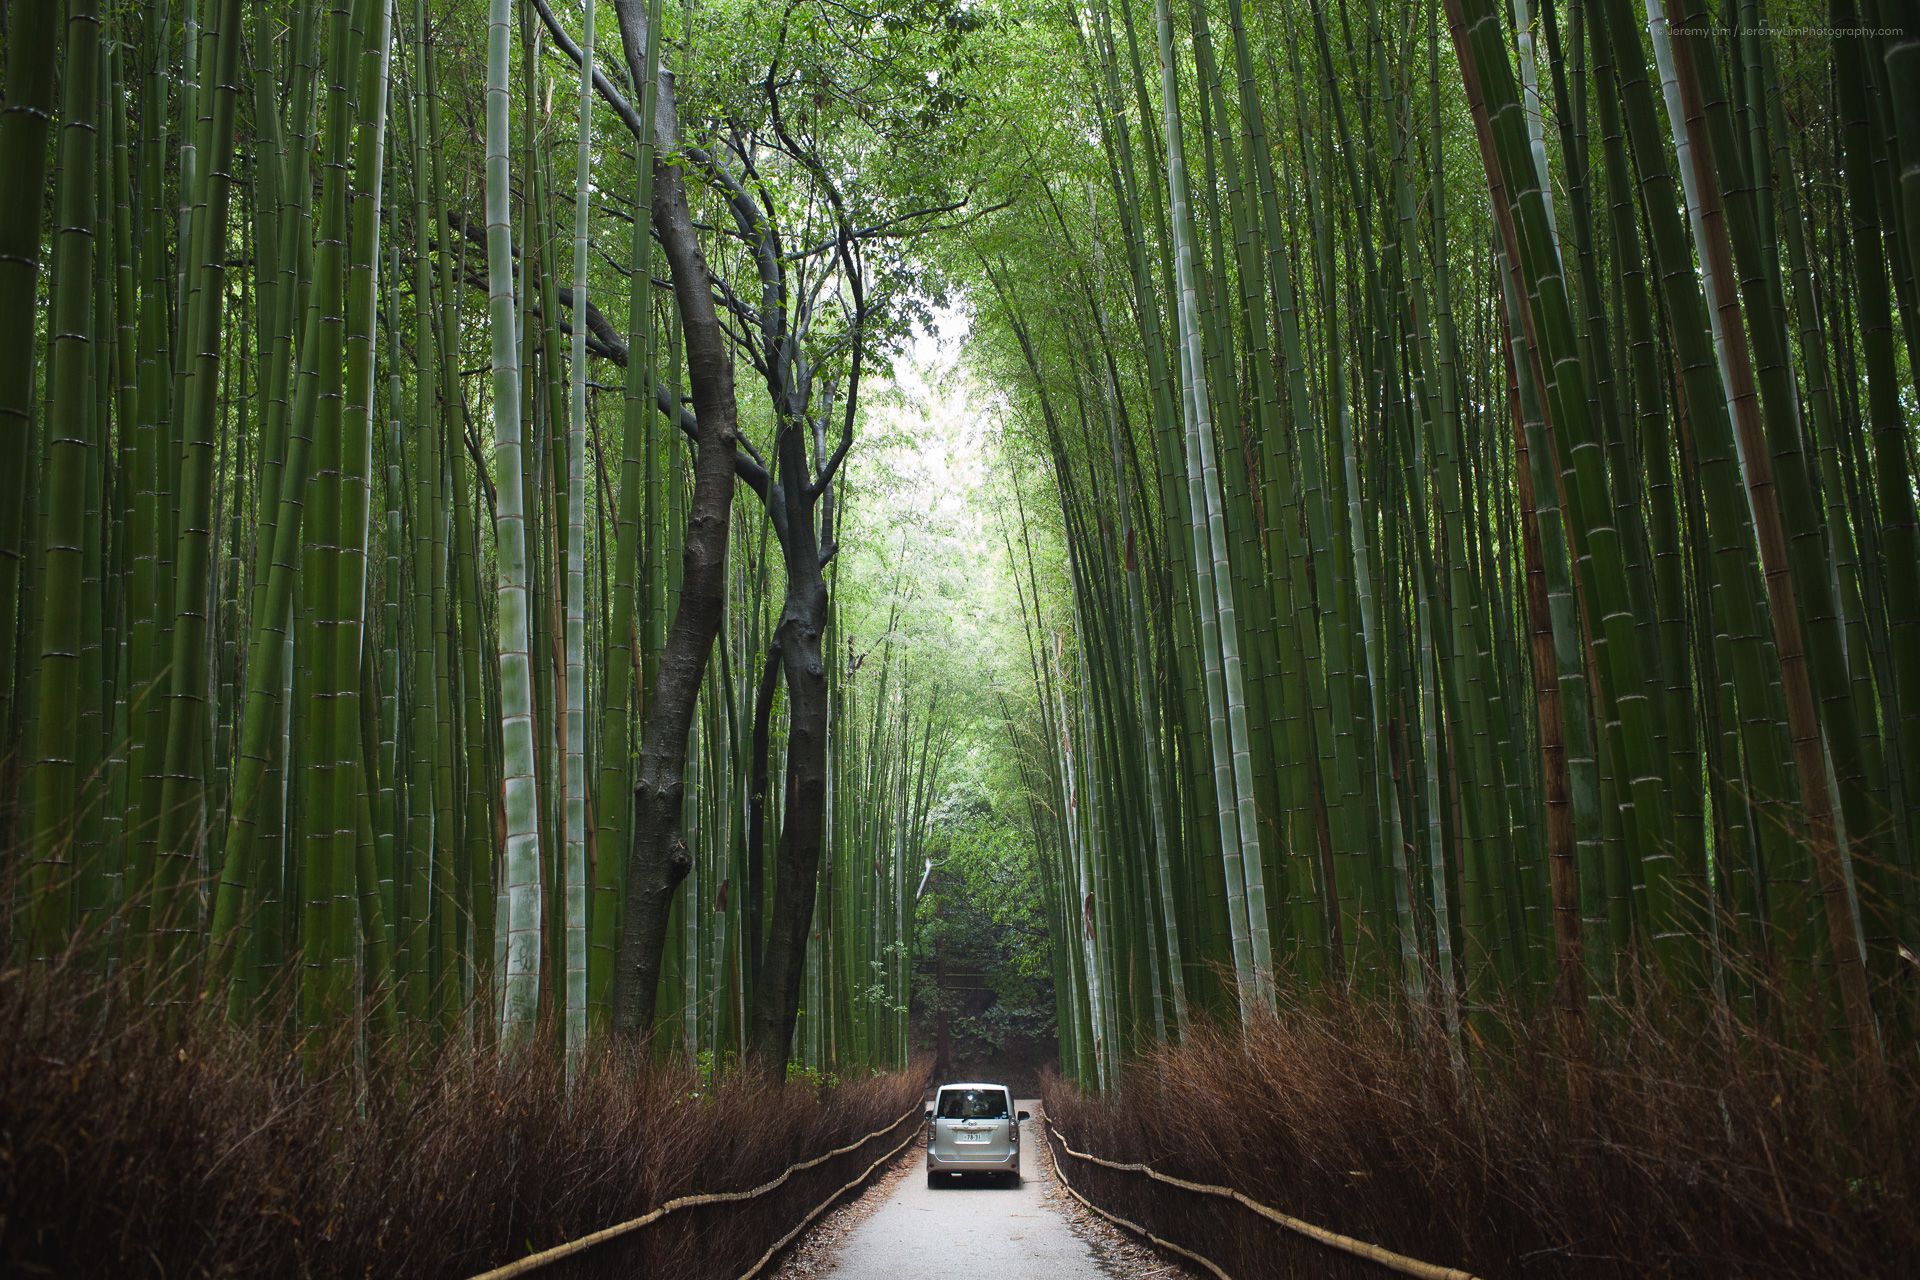 Arashiyama After Hours (Available in the Prints Store)